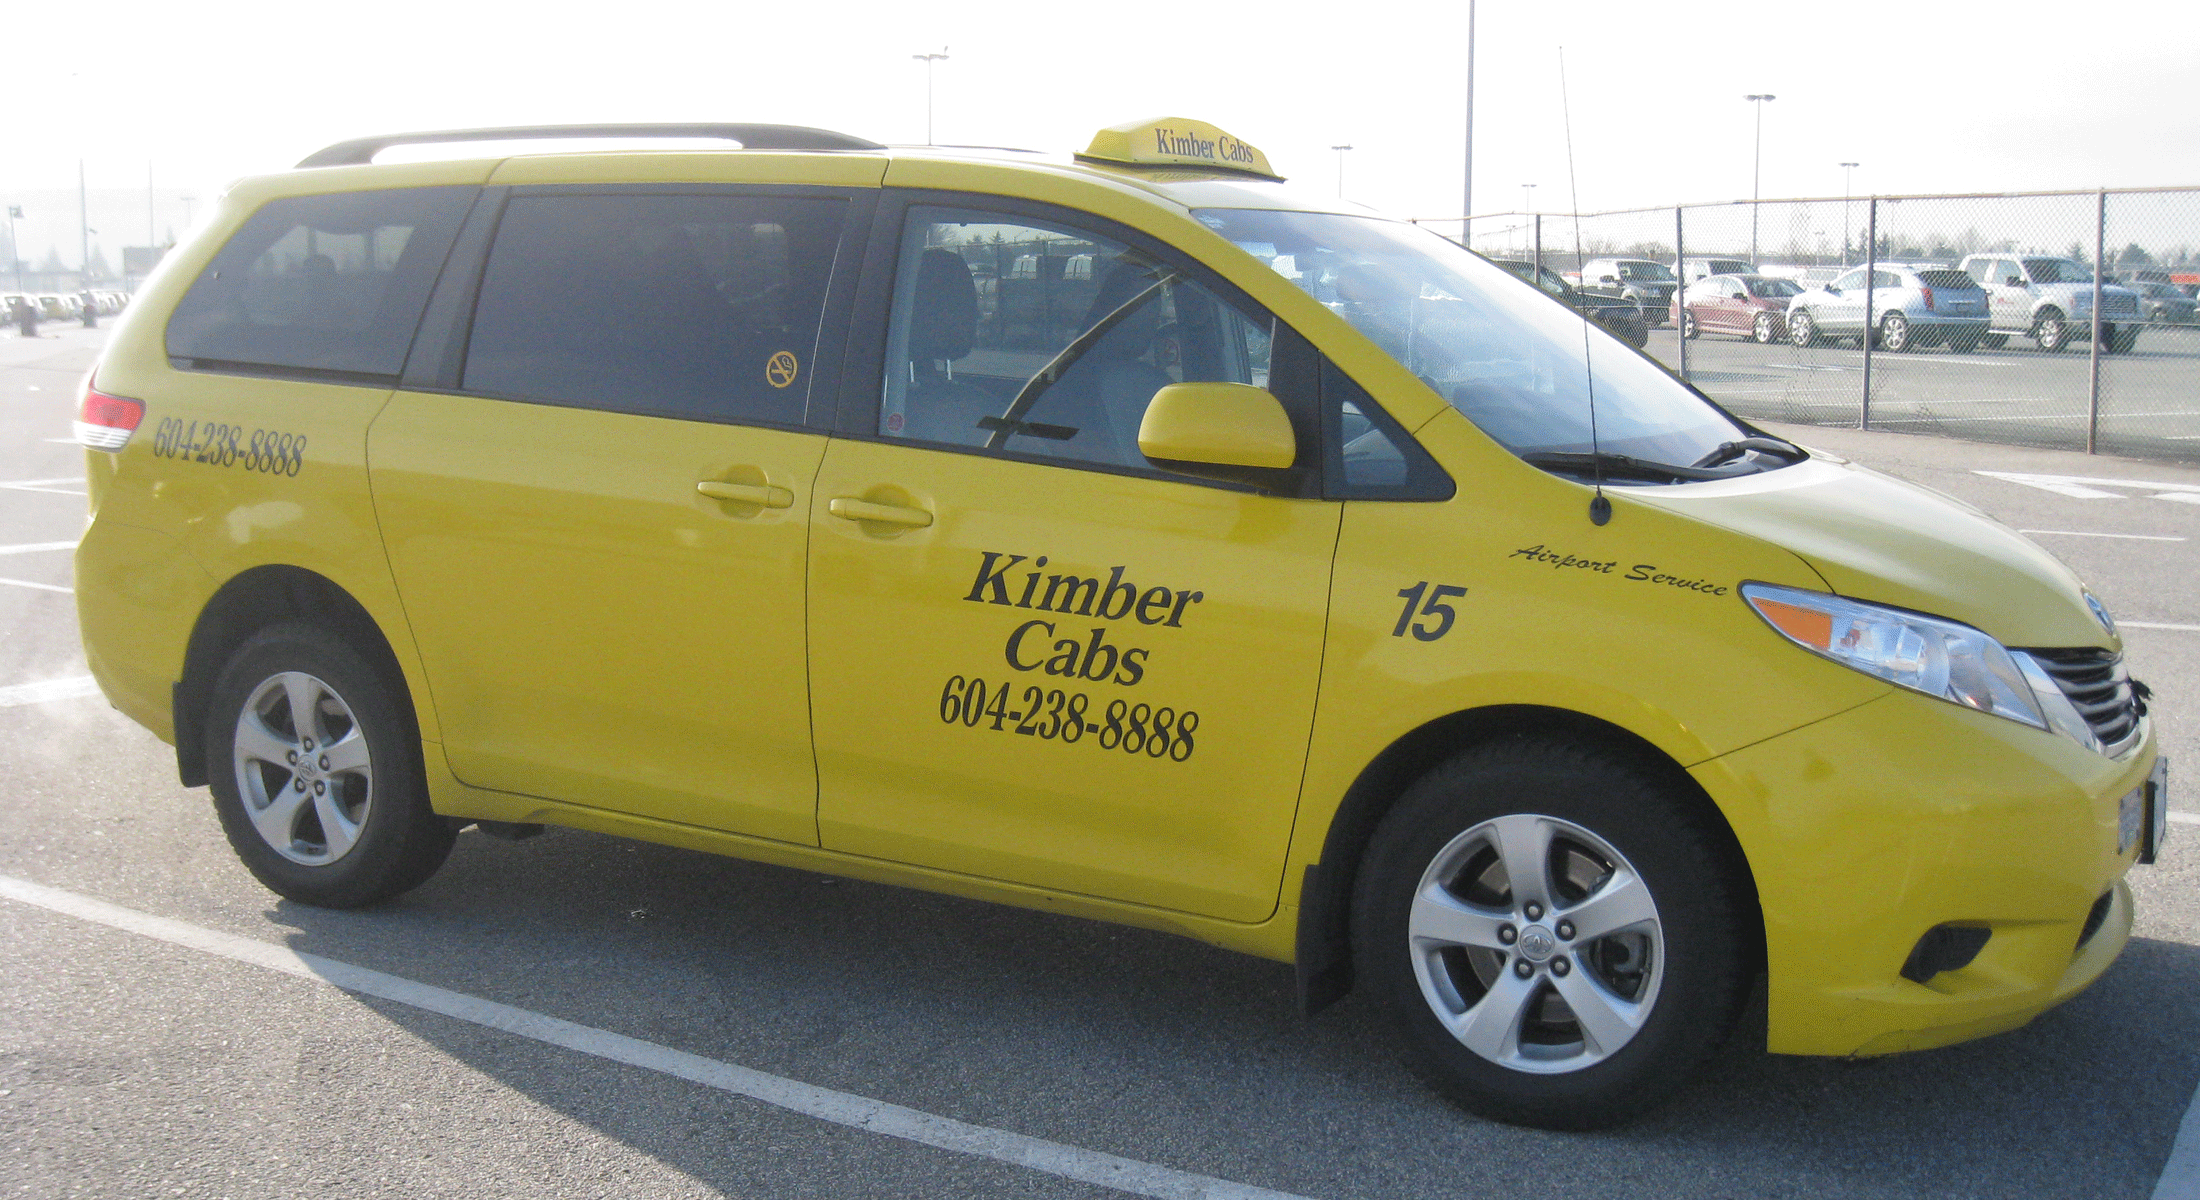 Kimber Cabs, Taxi in Vancouver, Surrey, Burnaby, New Westminster, Richmond,Whistler, YVR AirportBC Canada